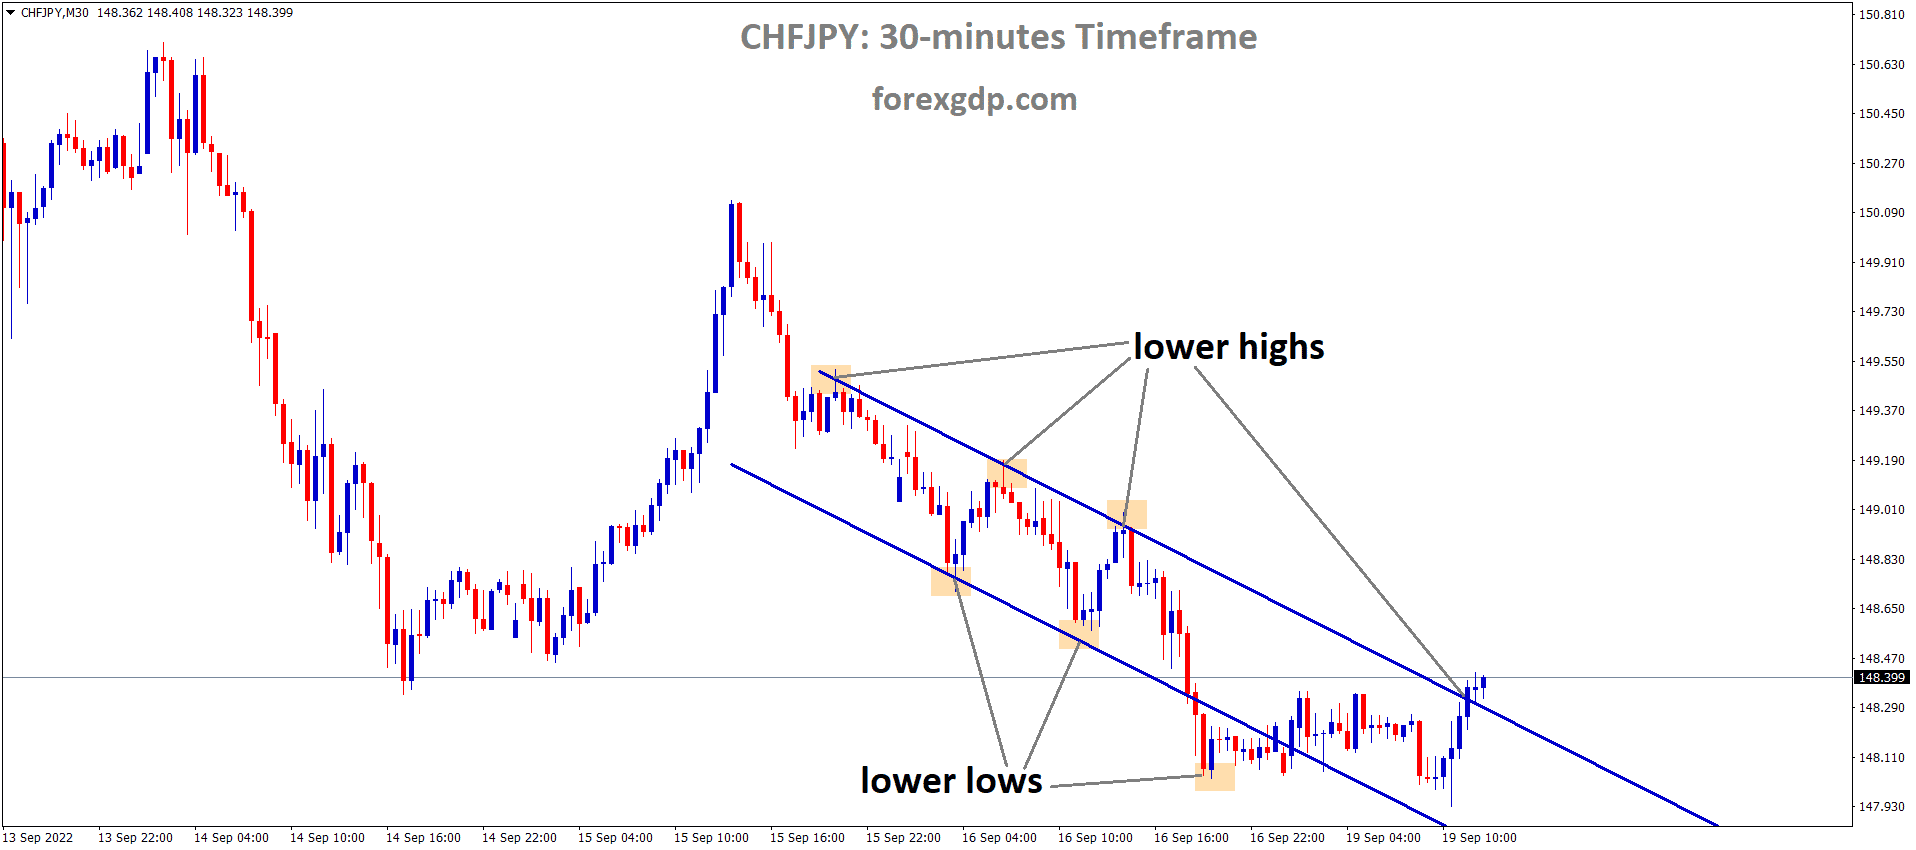 CHFJPY is moving in the Descending channel and the market has reached the lower high area of the channel